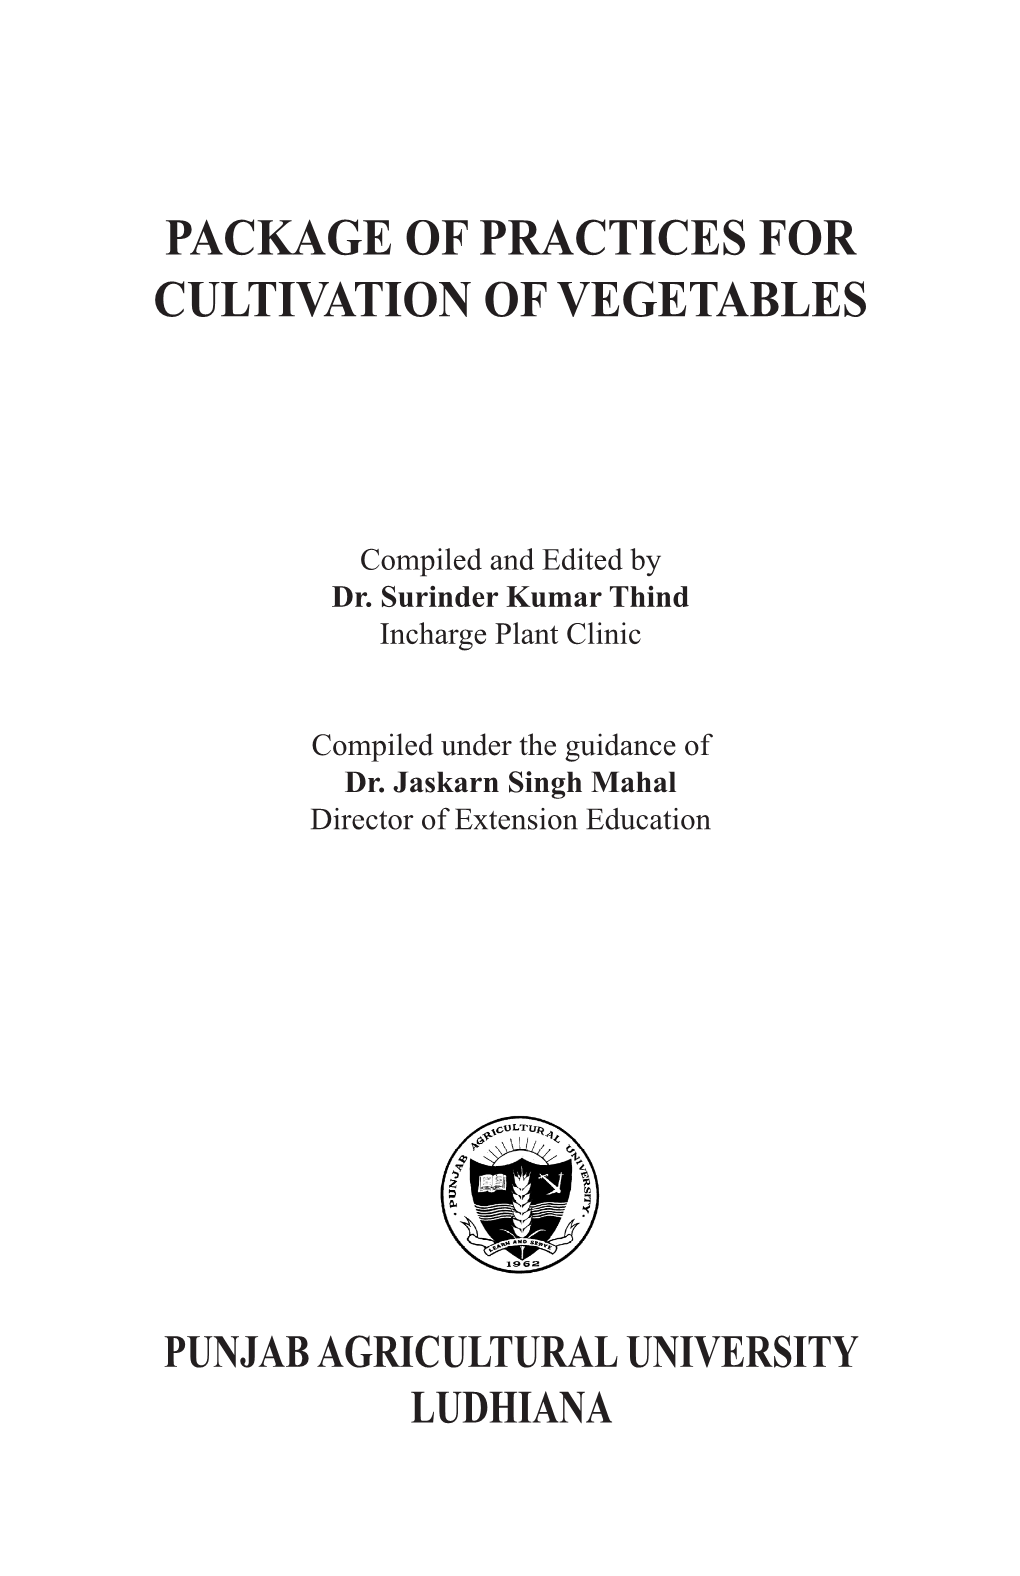 Package of Practices for Cultivation of Vegetables